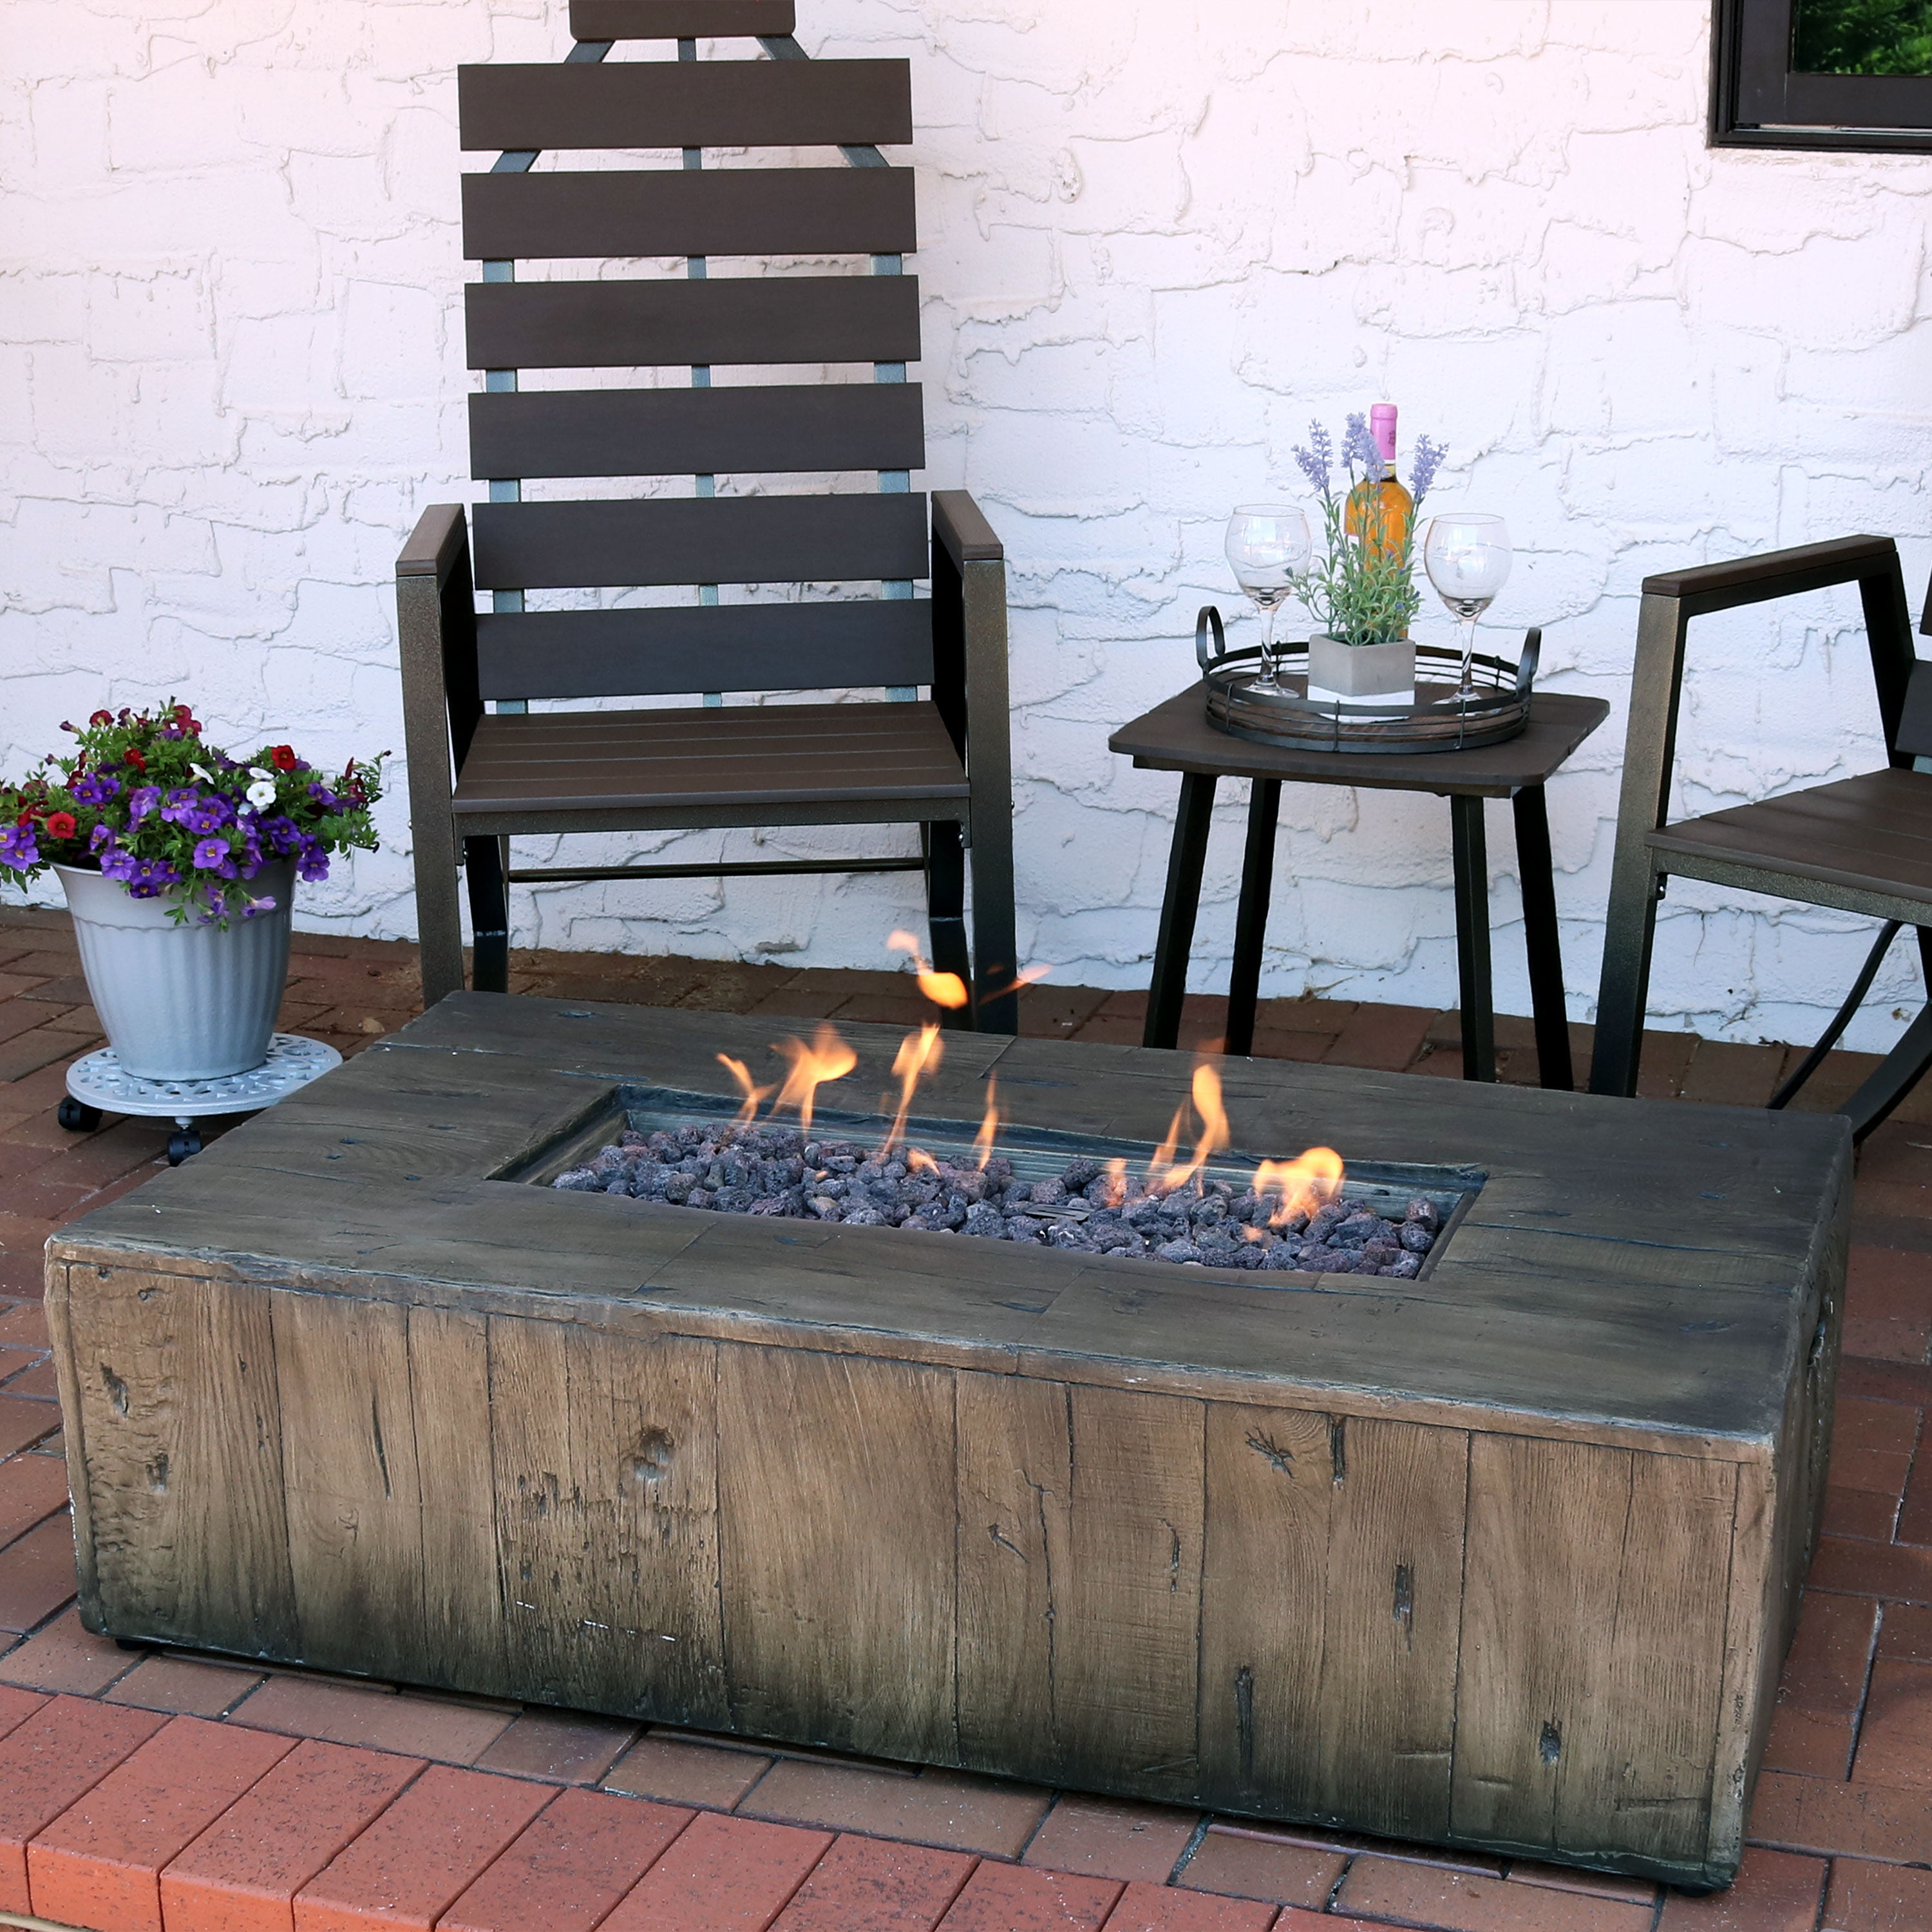 Sunnydaze Rustic Propane Gas Fire Pit, Outdoor Fire Pit Table Propane